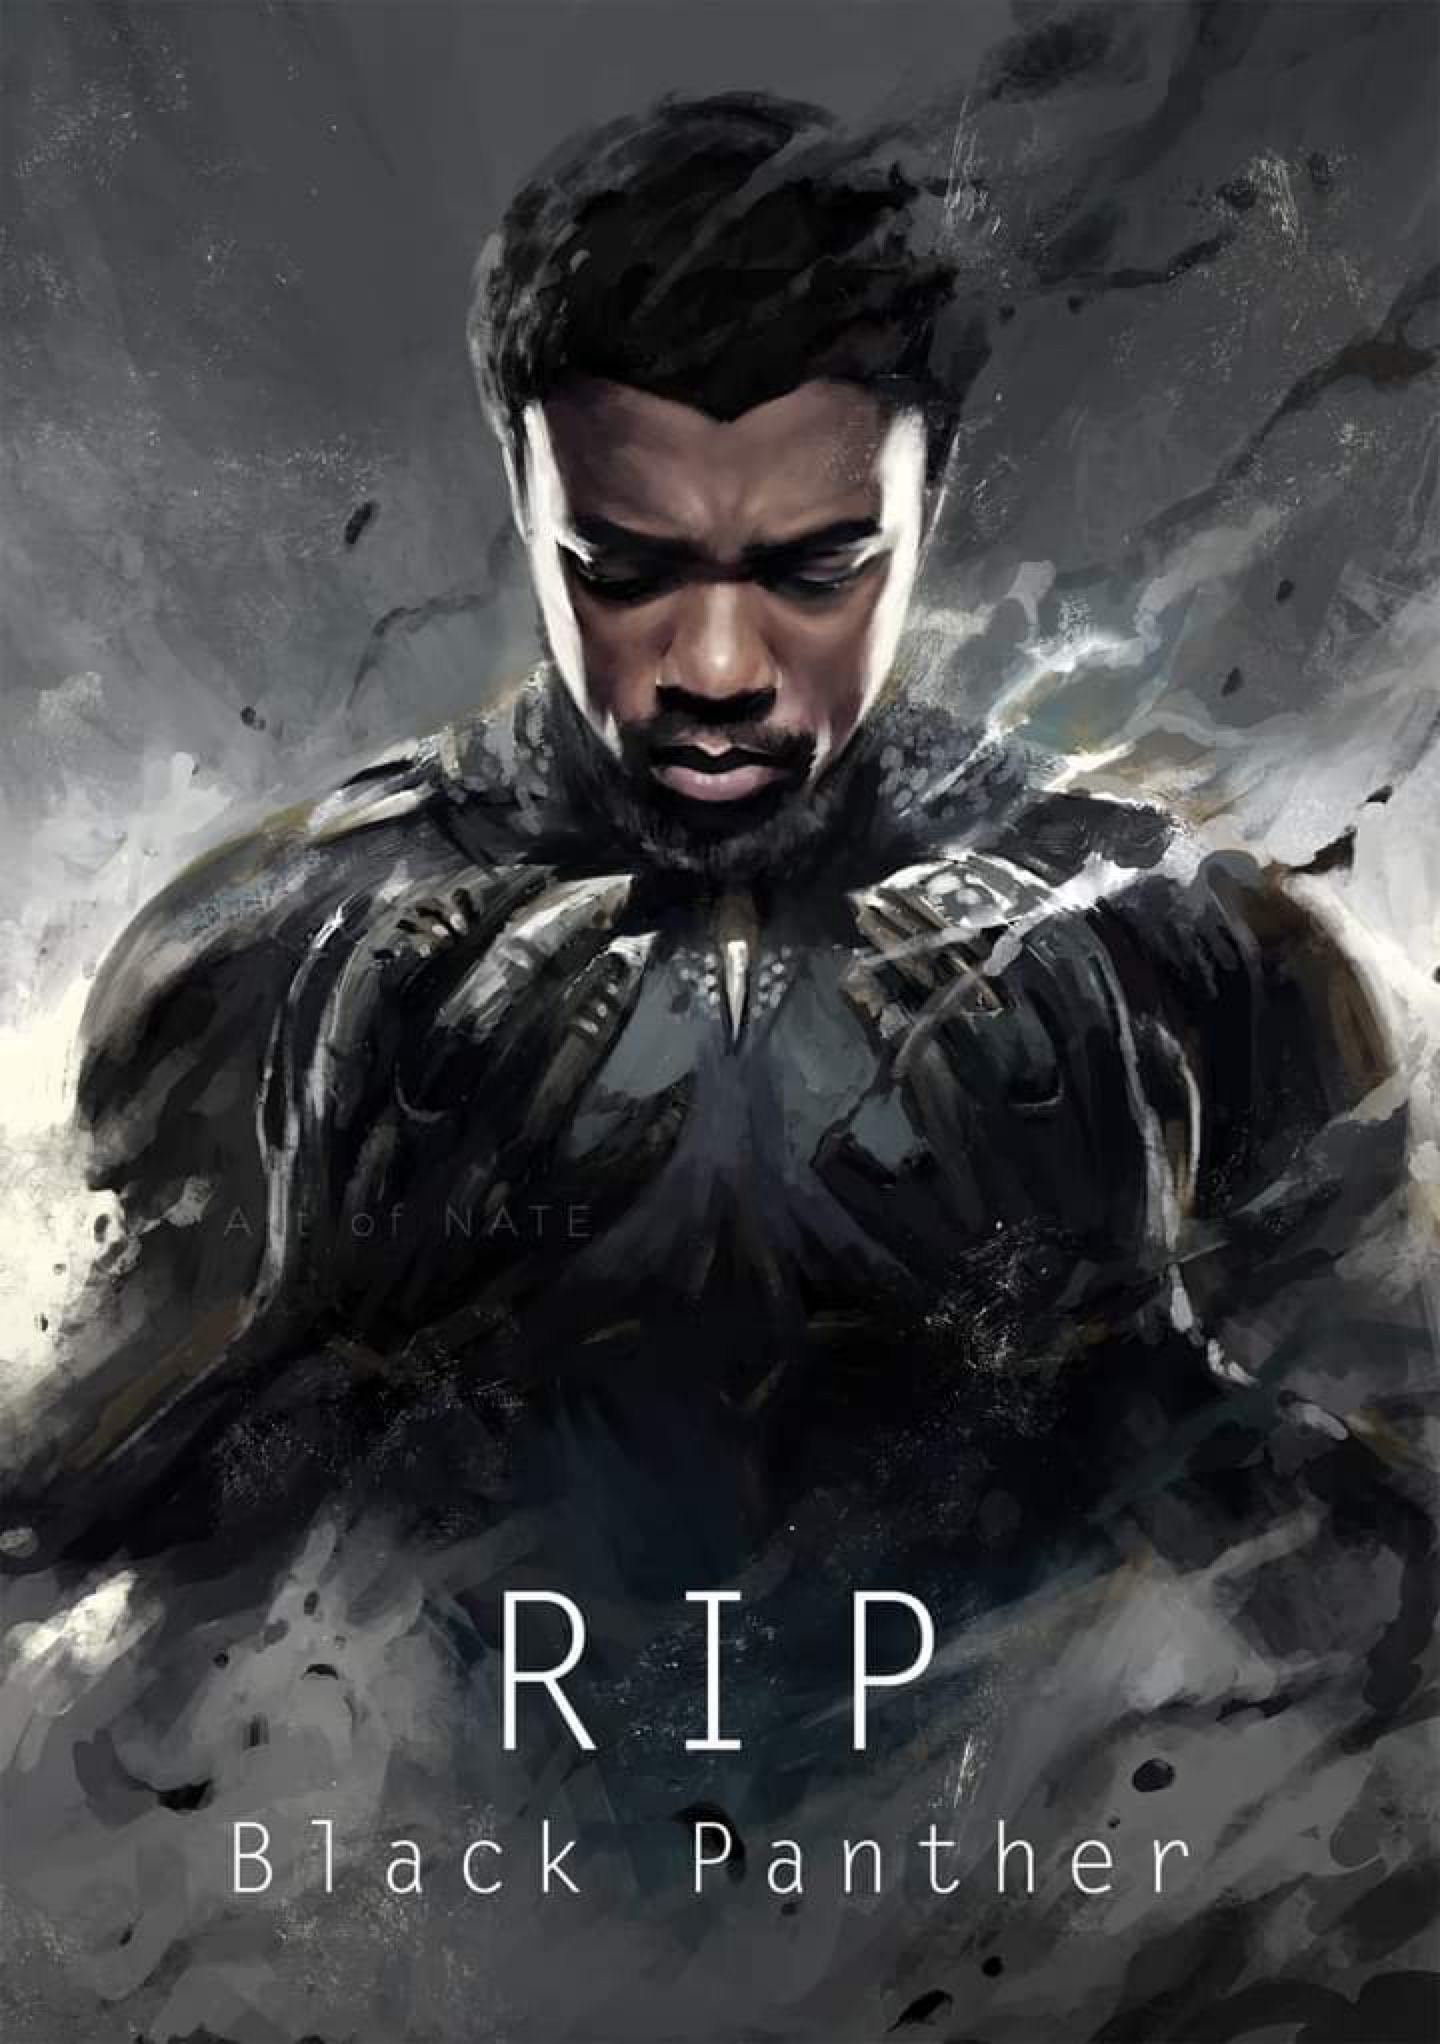 Black Panther download the new